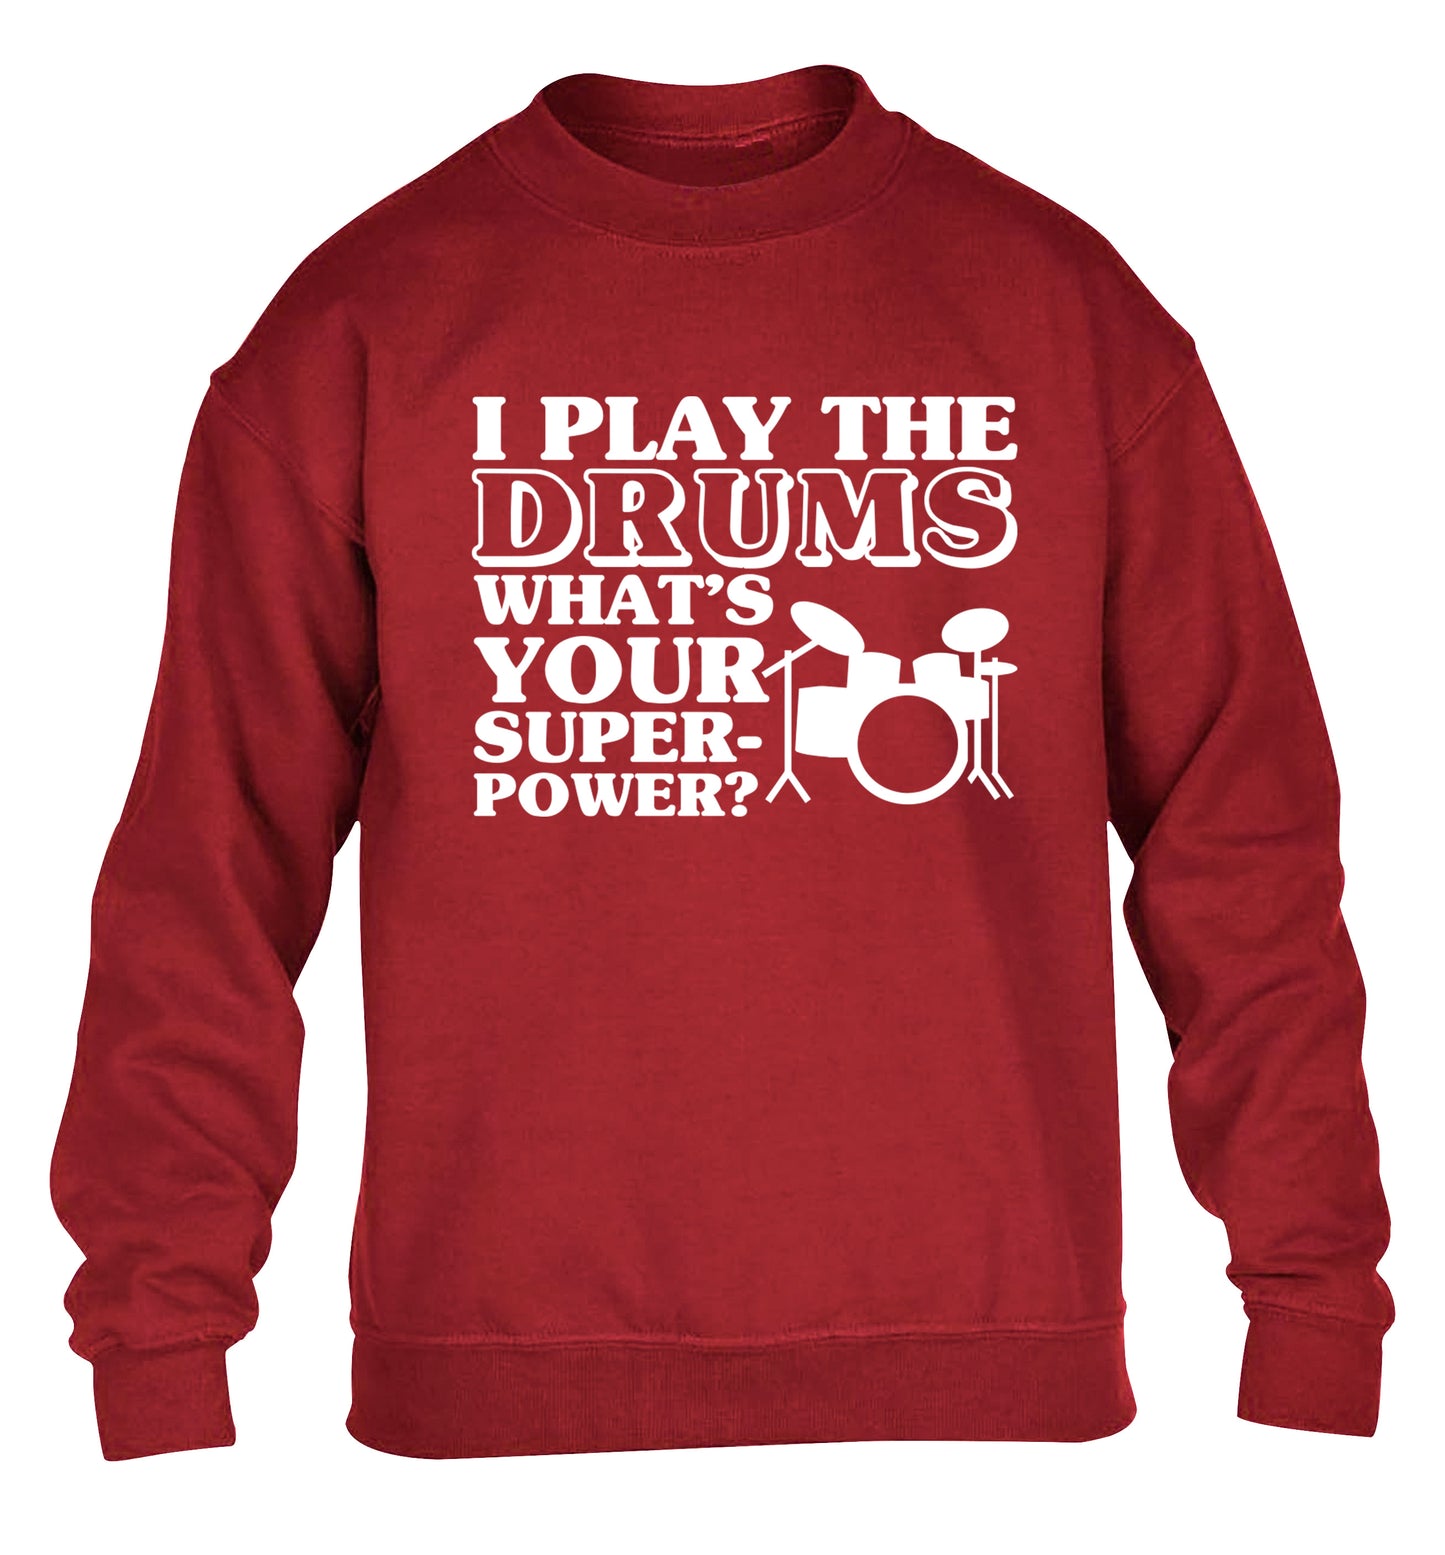 I play the drums what's your superpower? children's grey sweater 12-14 Years